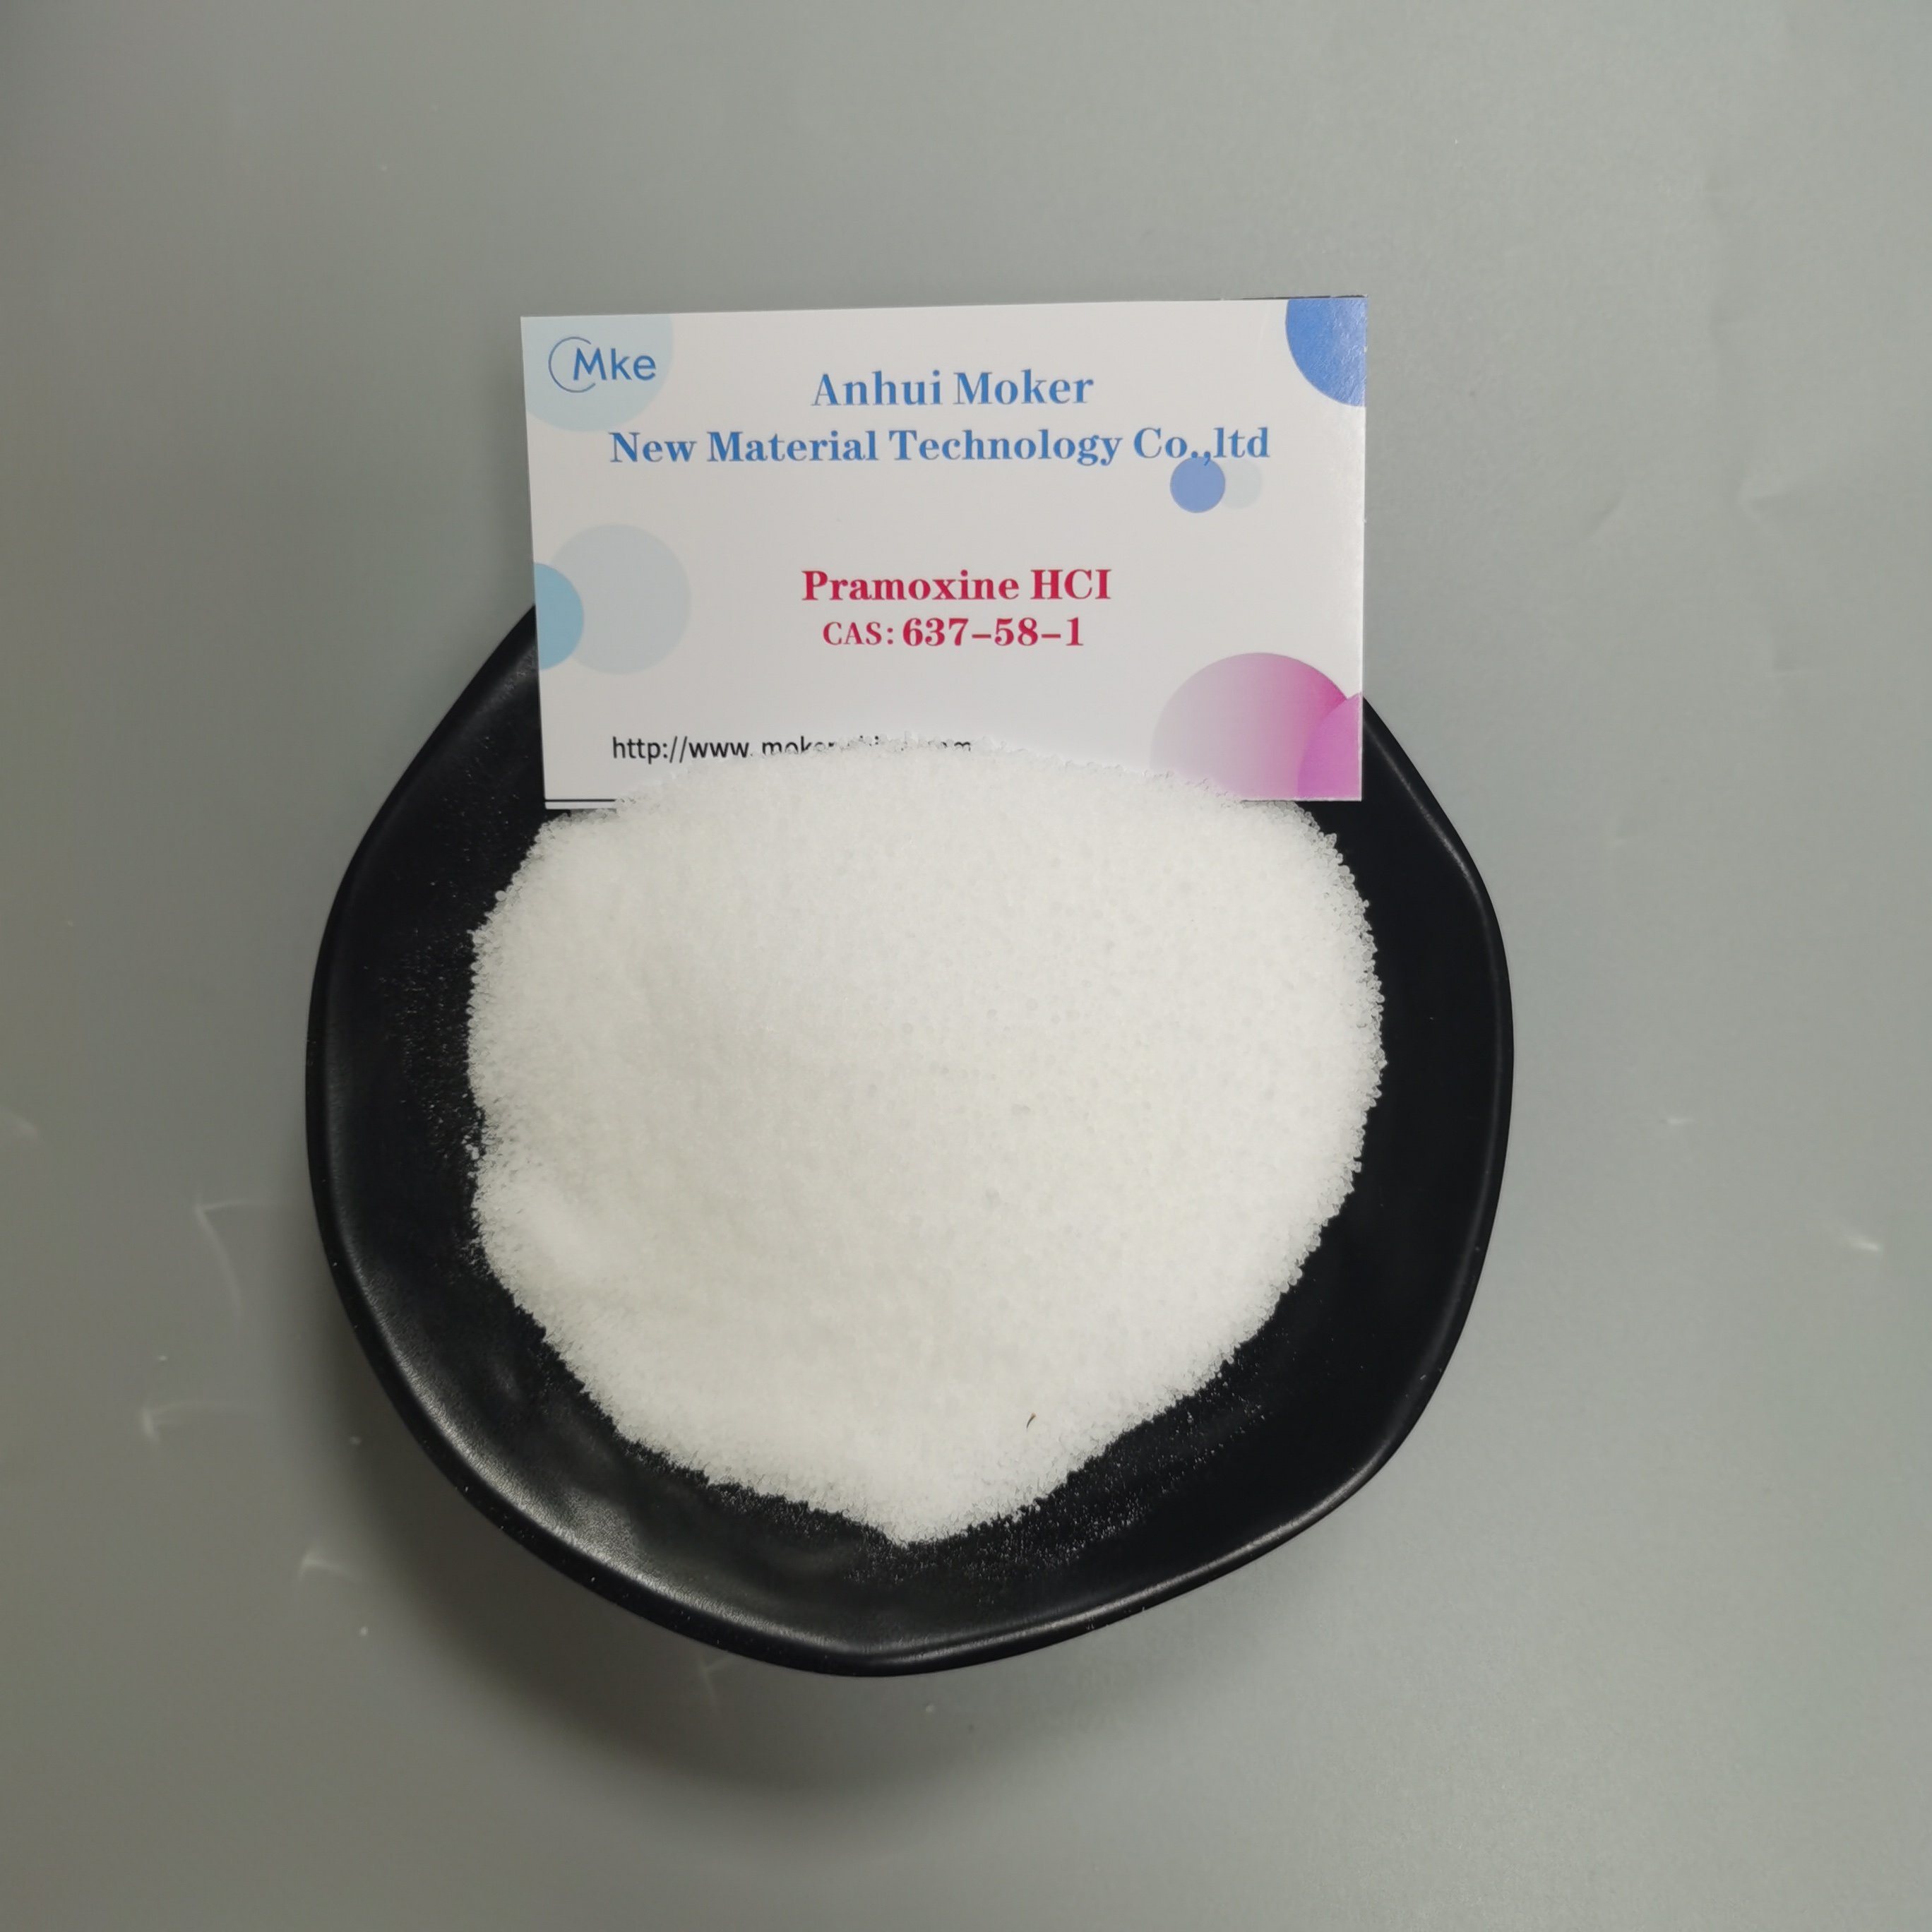  Topical Anesthetic Pramoxine Hydrochloride/Pramoxine HCl CAS 637-58-1 Used As An Antipruritic